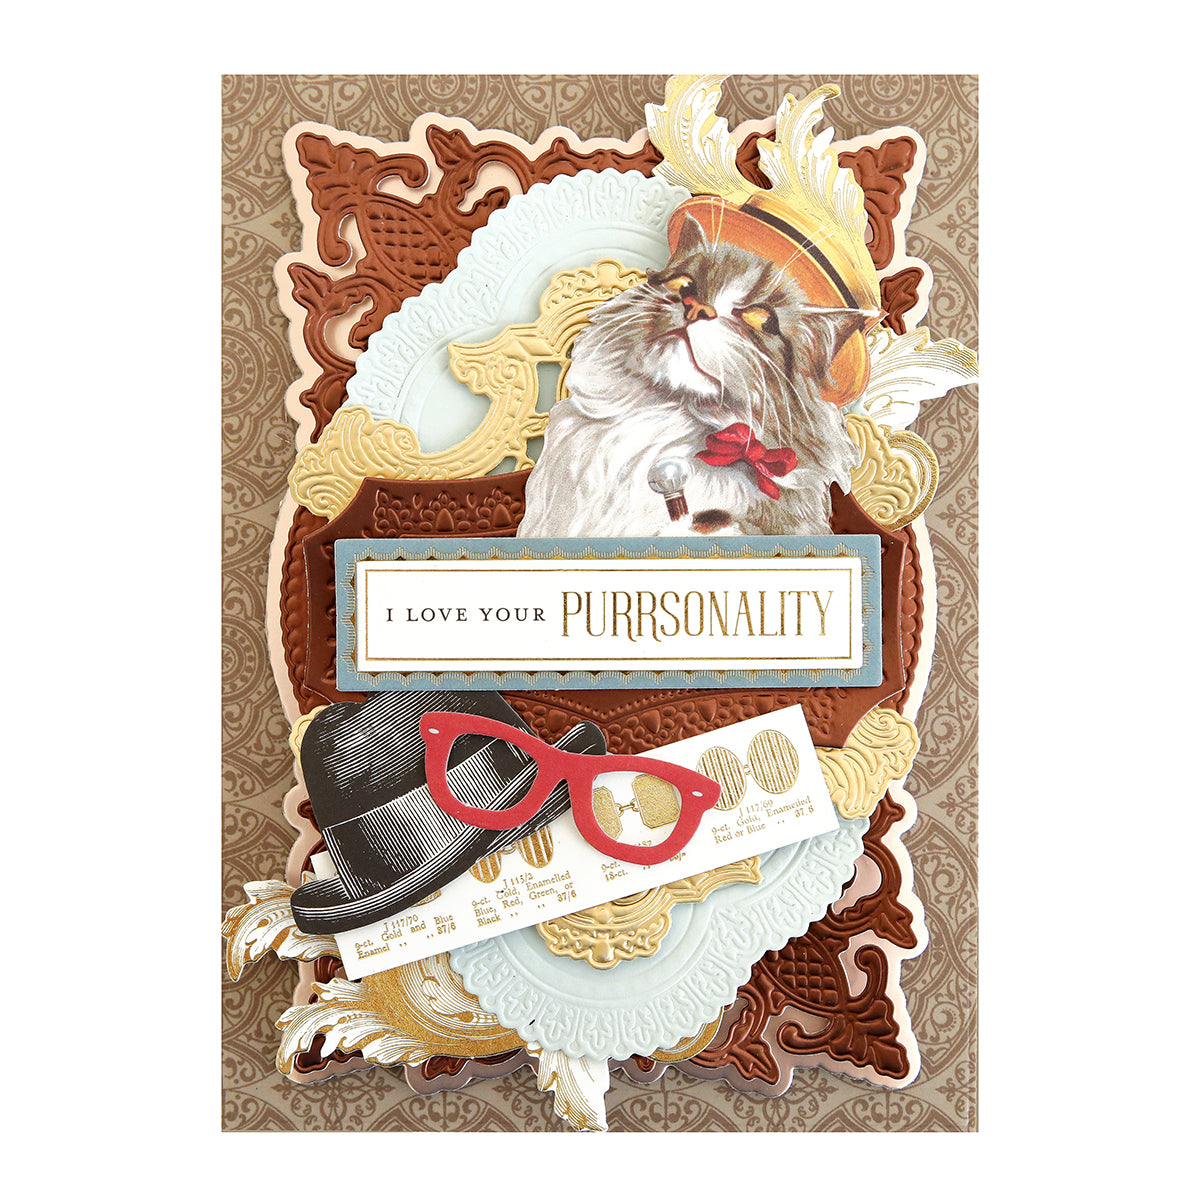 Illustration of a guinea pig with glasses and a hat, accompanied by the sentiment "i love your purrsonality" on a decorative background featuring dimensional Fur Baby Cat Stickers and Sentiments.